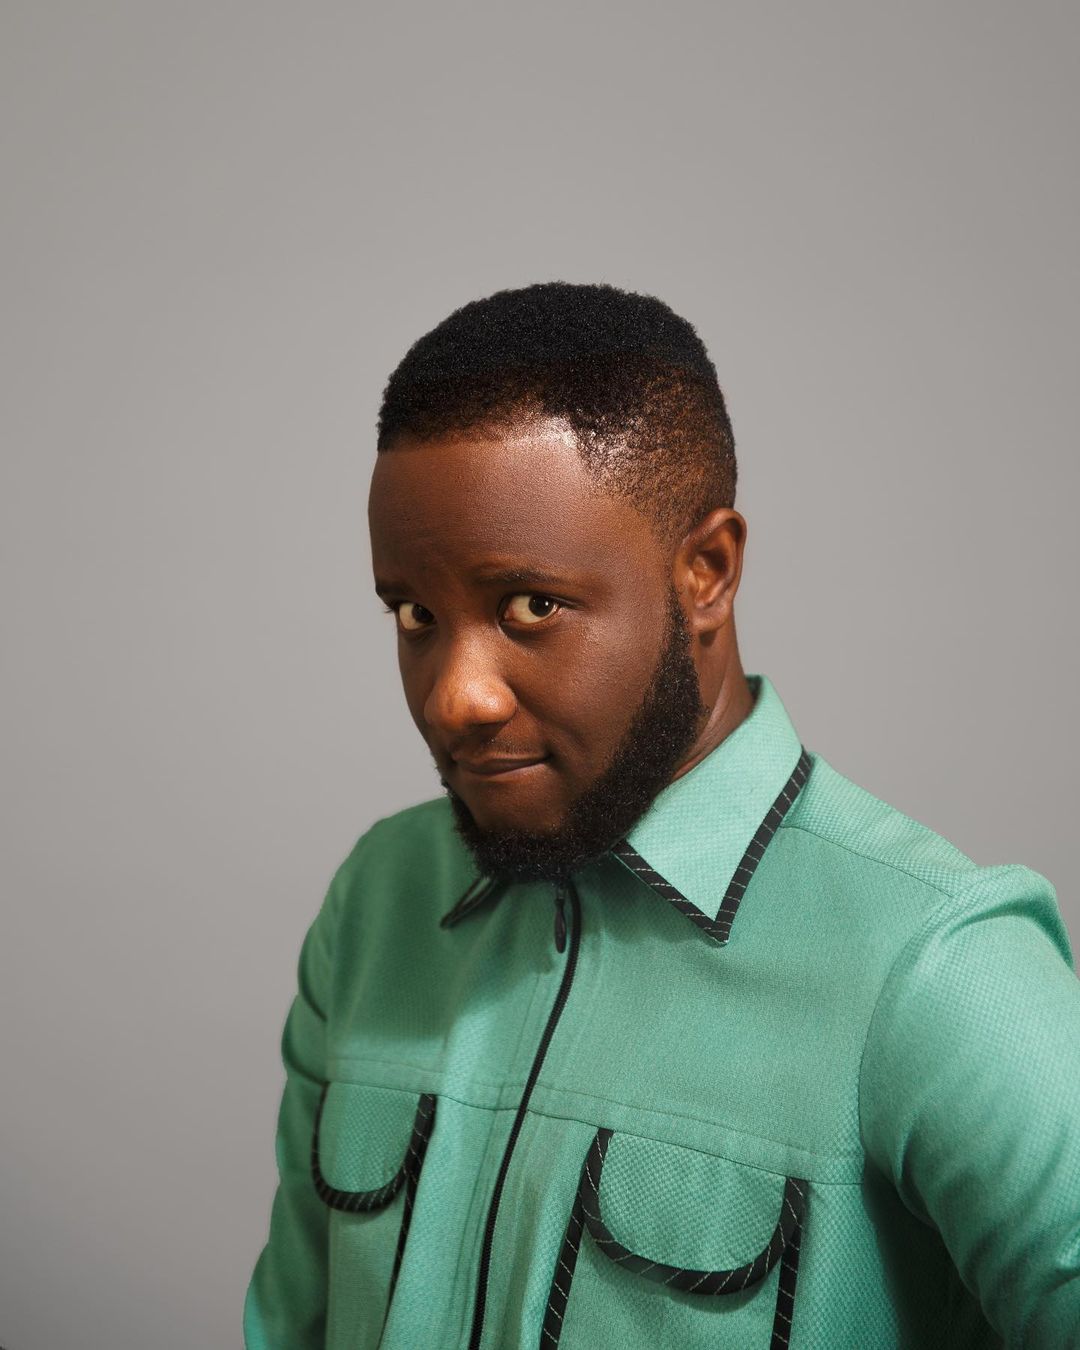 "Who are you that can't be disrespected" – DeeOne knocks Nasboi for fuming over Yhemolee's statement